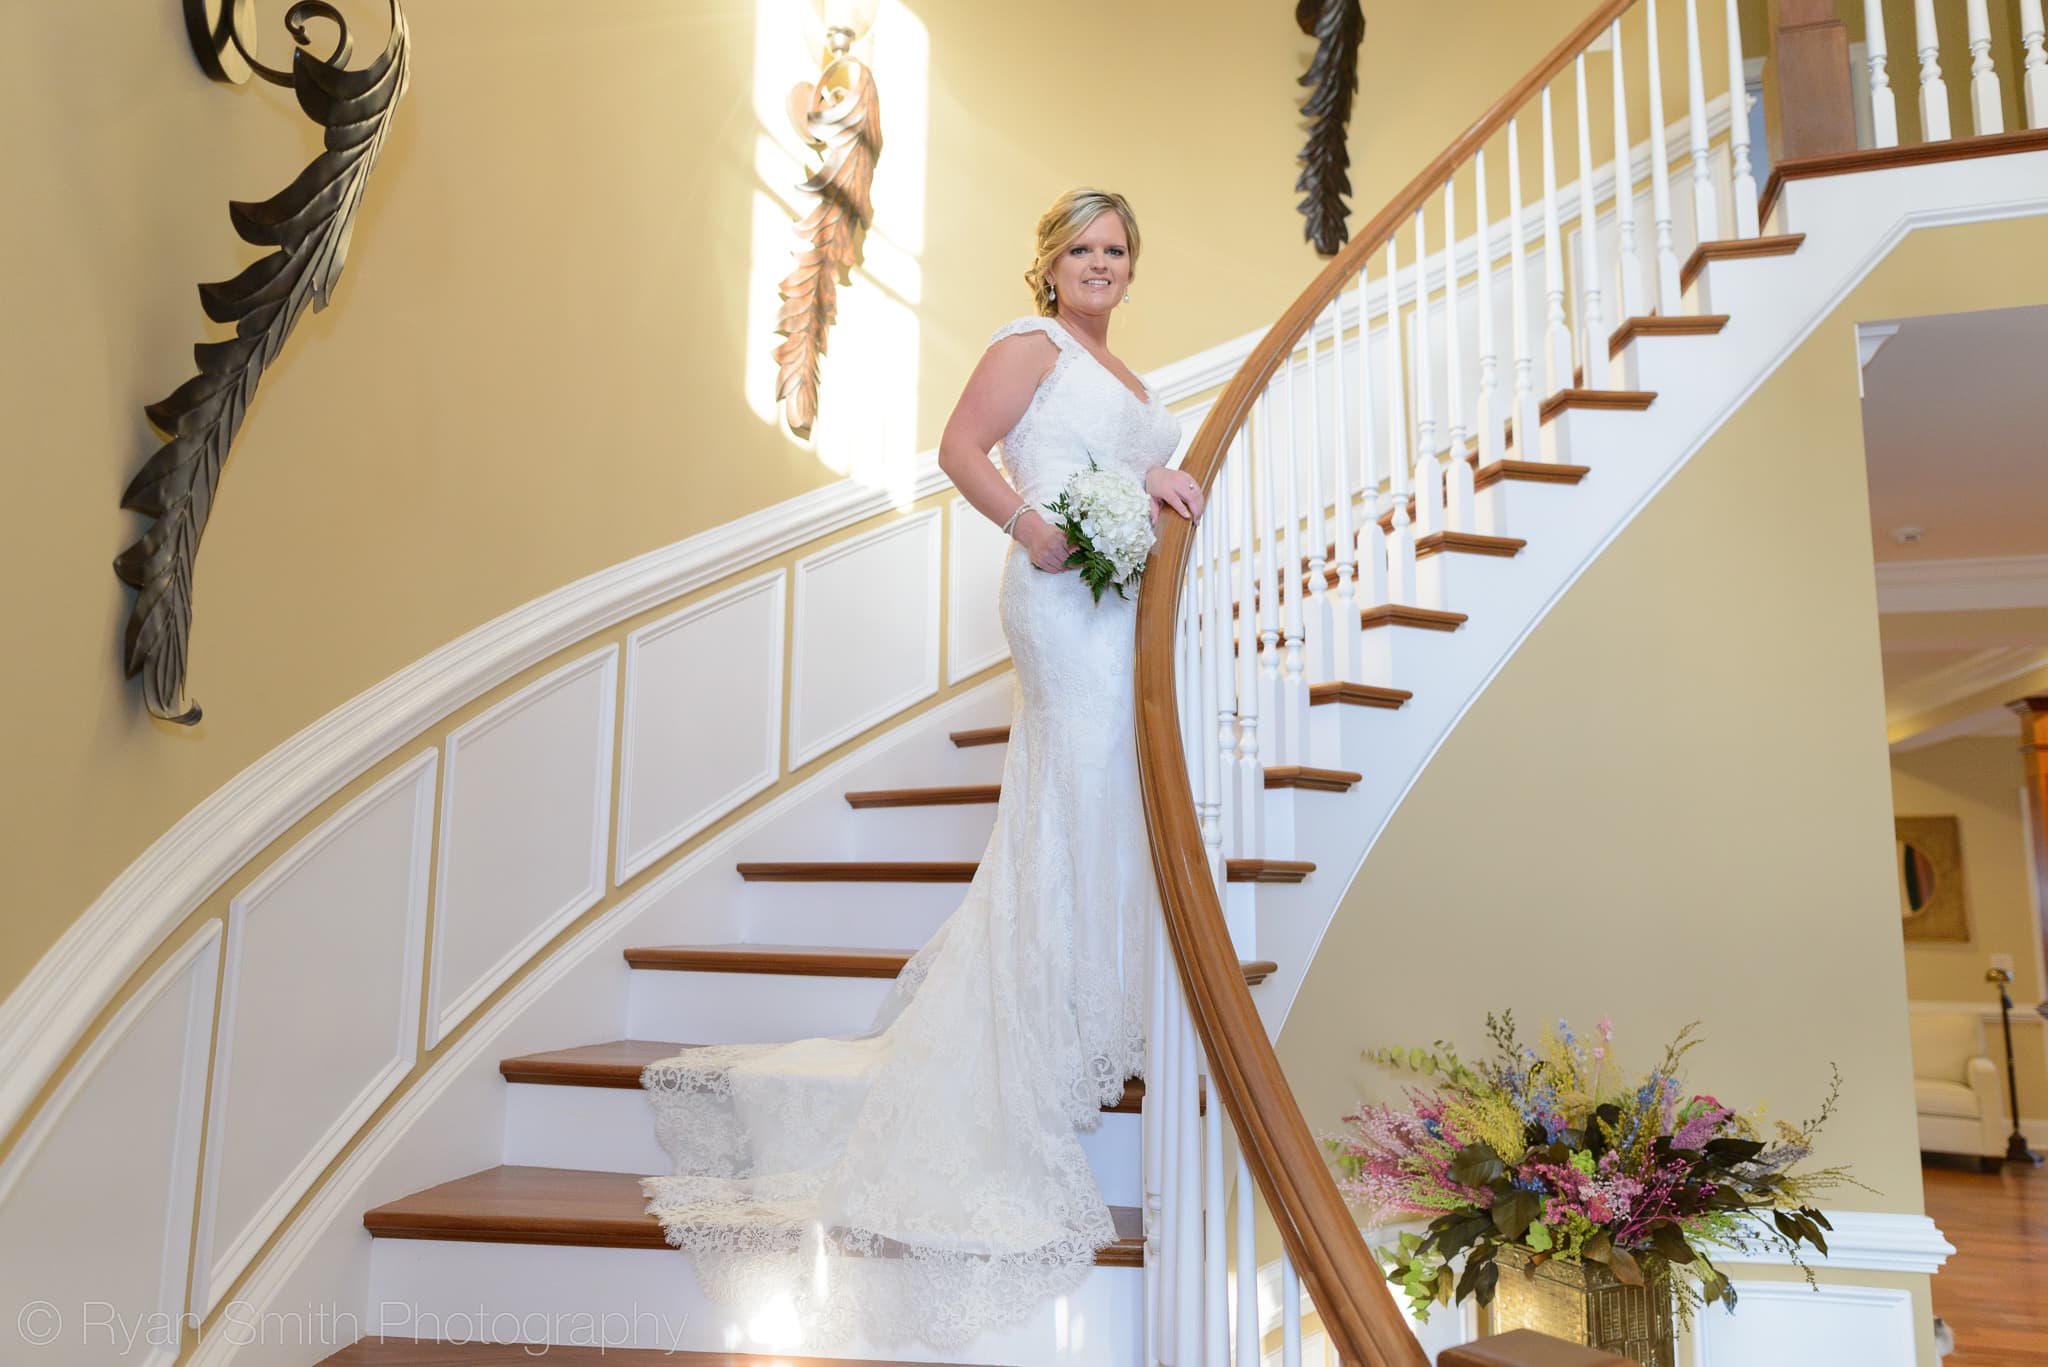 Bride on a staircase -